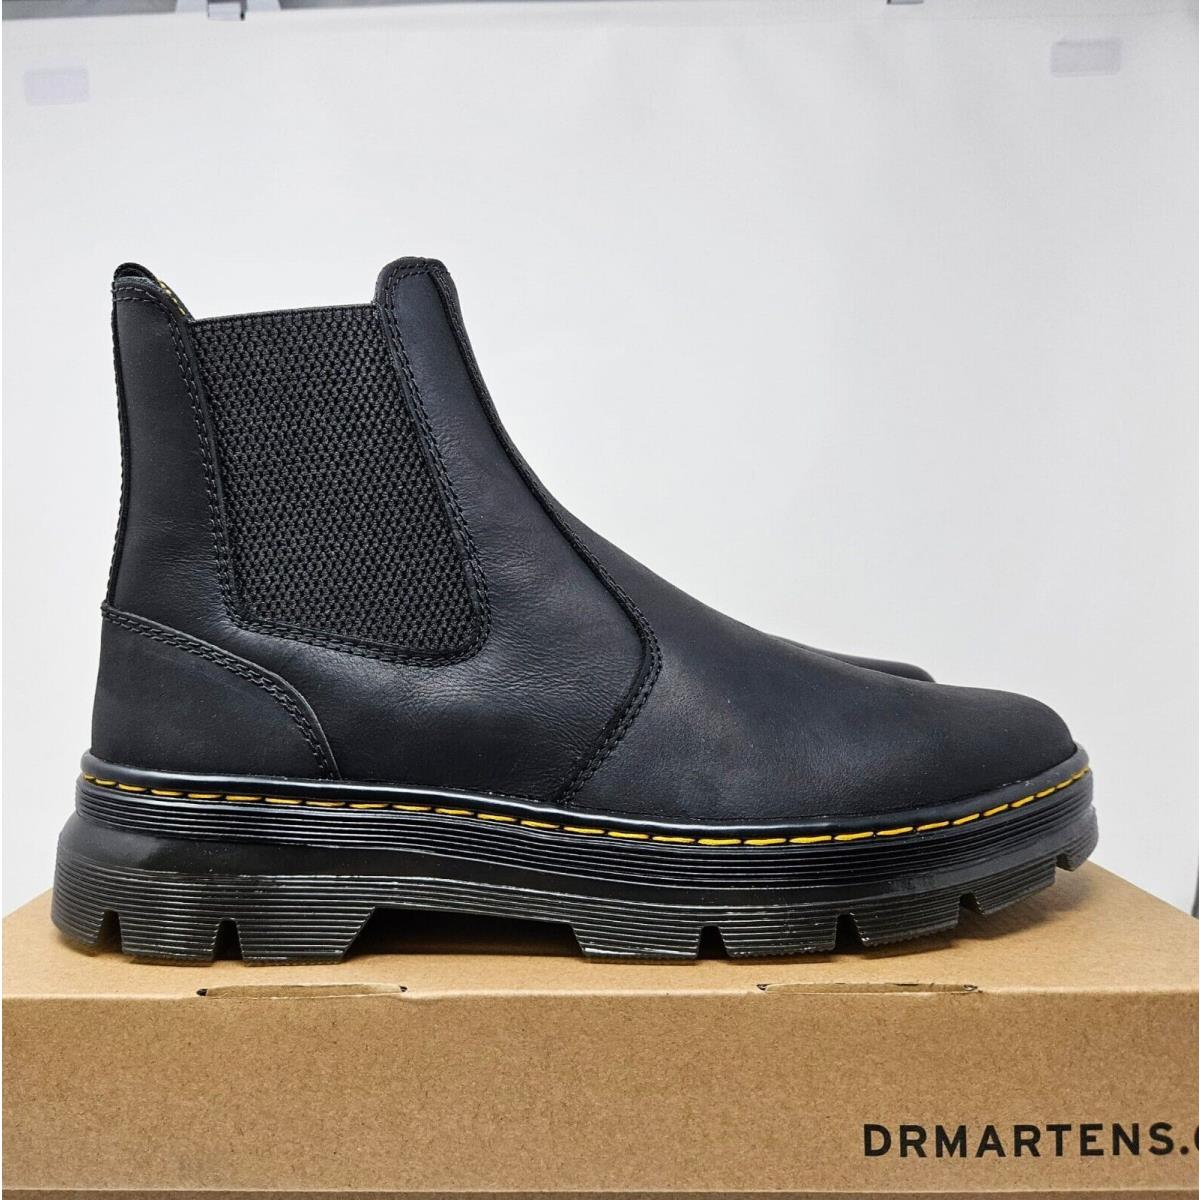 Dr Martens- Embury Leather Casual Chelsea Boots Black Wyoming 26002001 Men